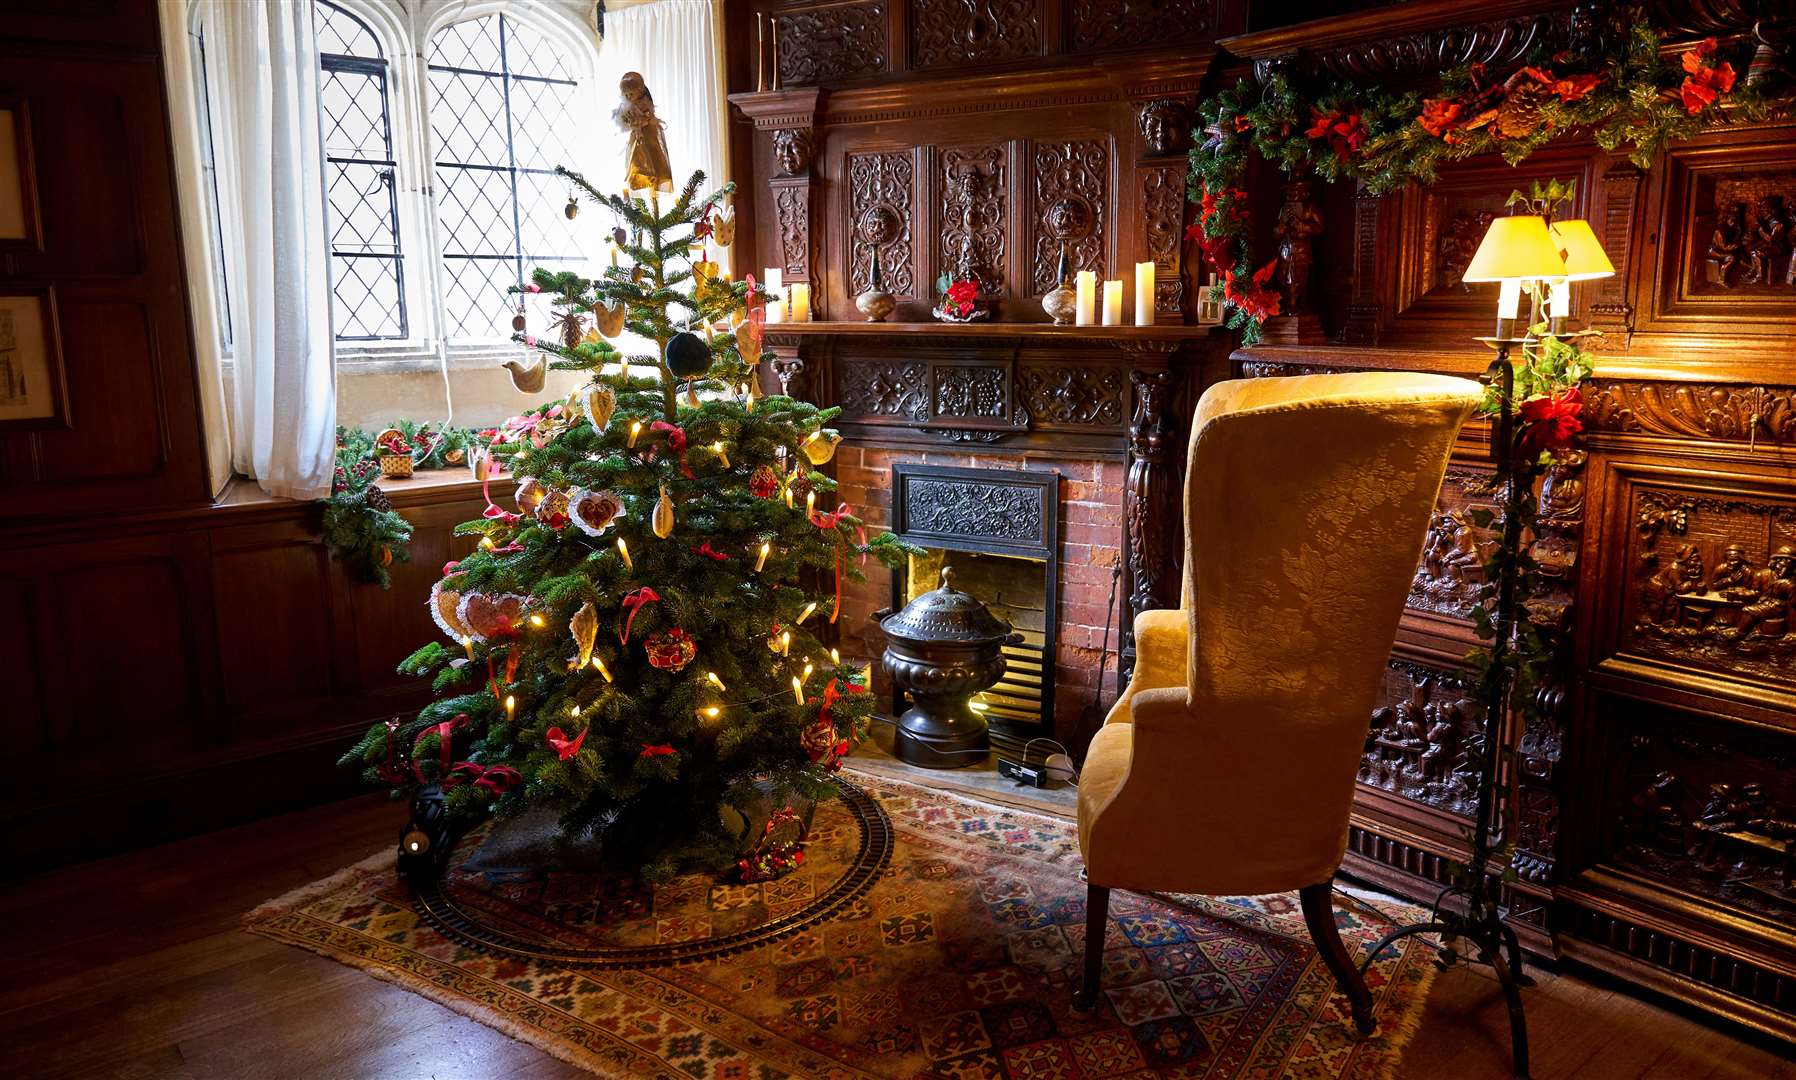 Ightham Mote will be decked out for Christmas – although you’ll need a separate ticket to see inside the house. Picture: ©National Trust Images / Arnhel de Serra